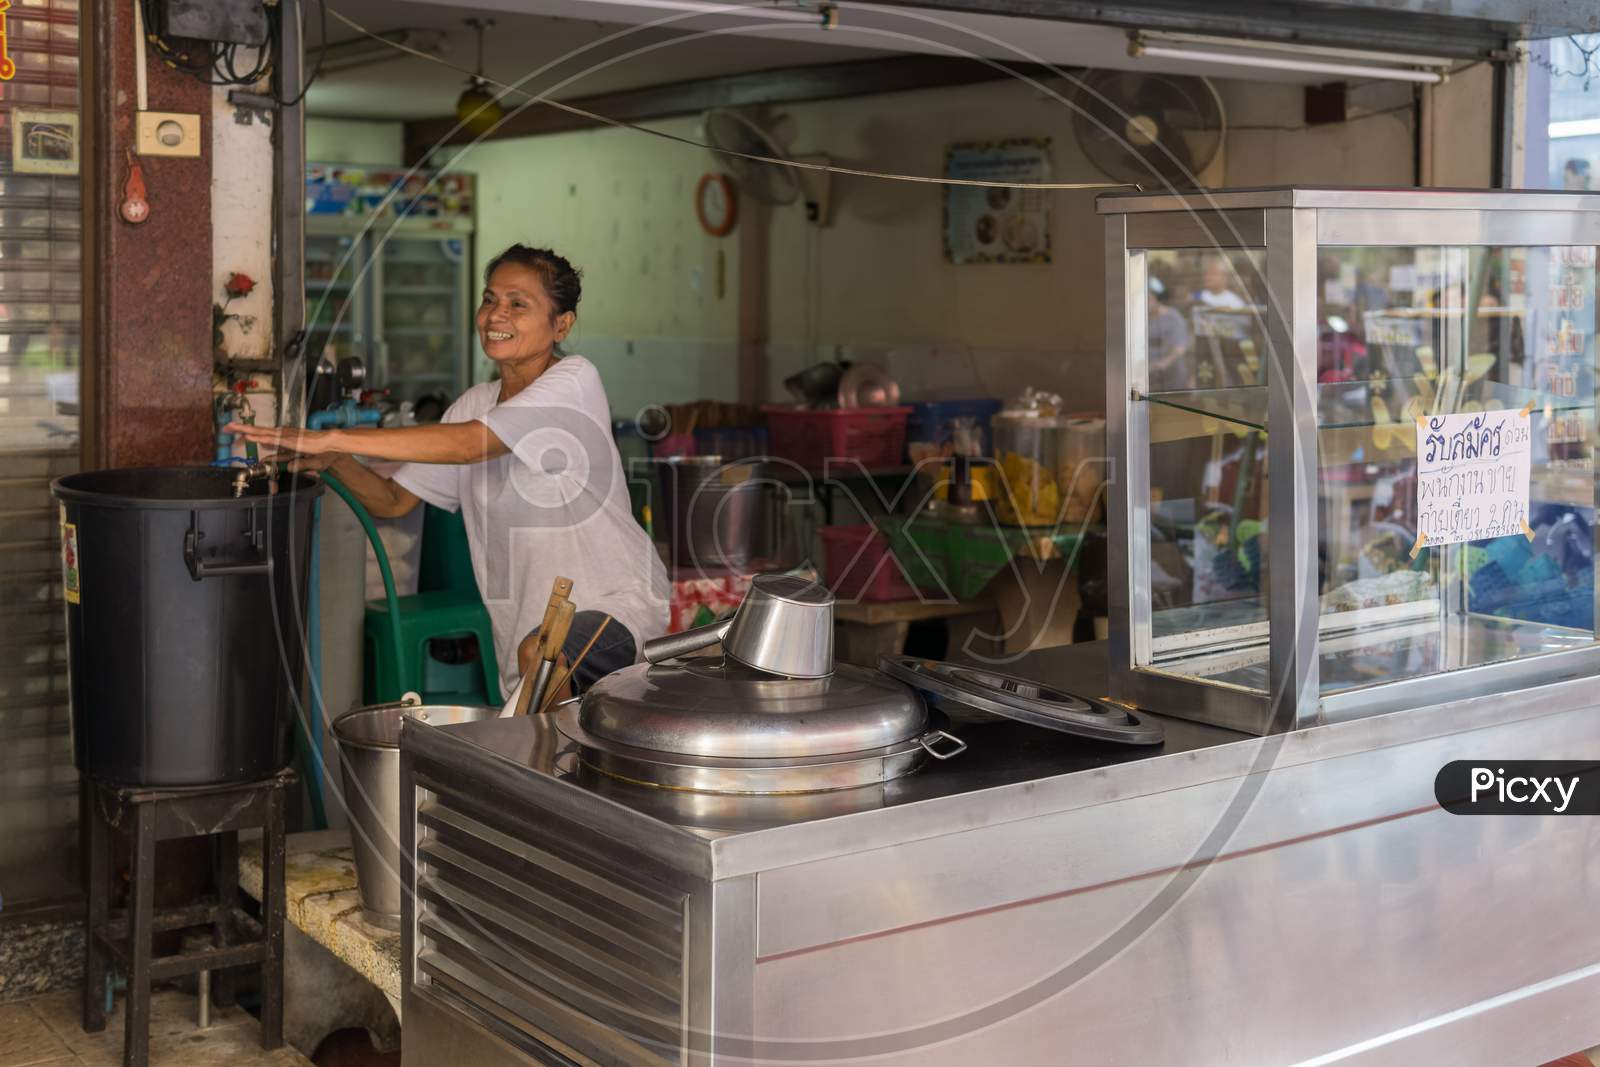 Pattaya,Thailand - October 22,2018:Soi Buakhaow A Thai Woman Is Preparing Her Food Stall For Cooking And Customers.